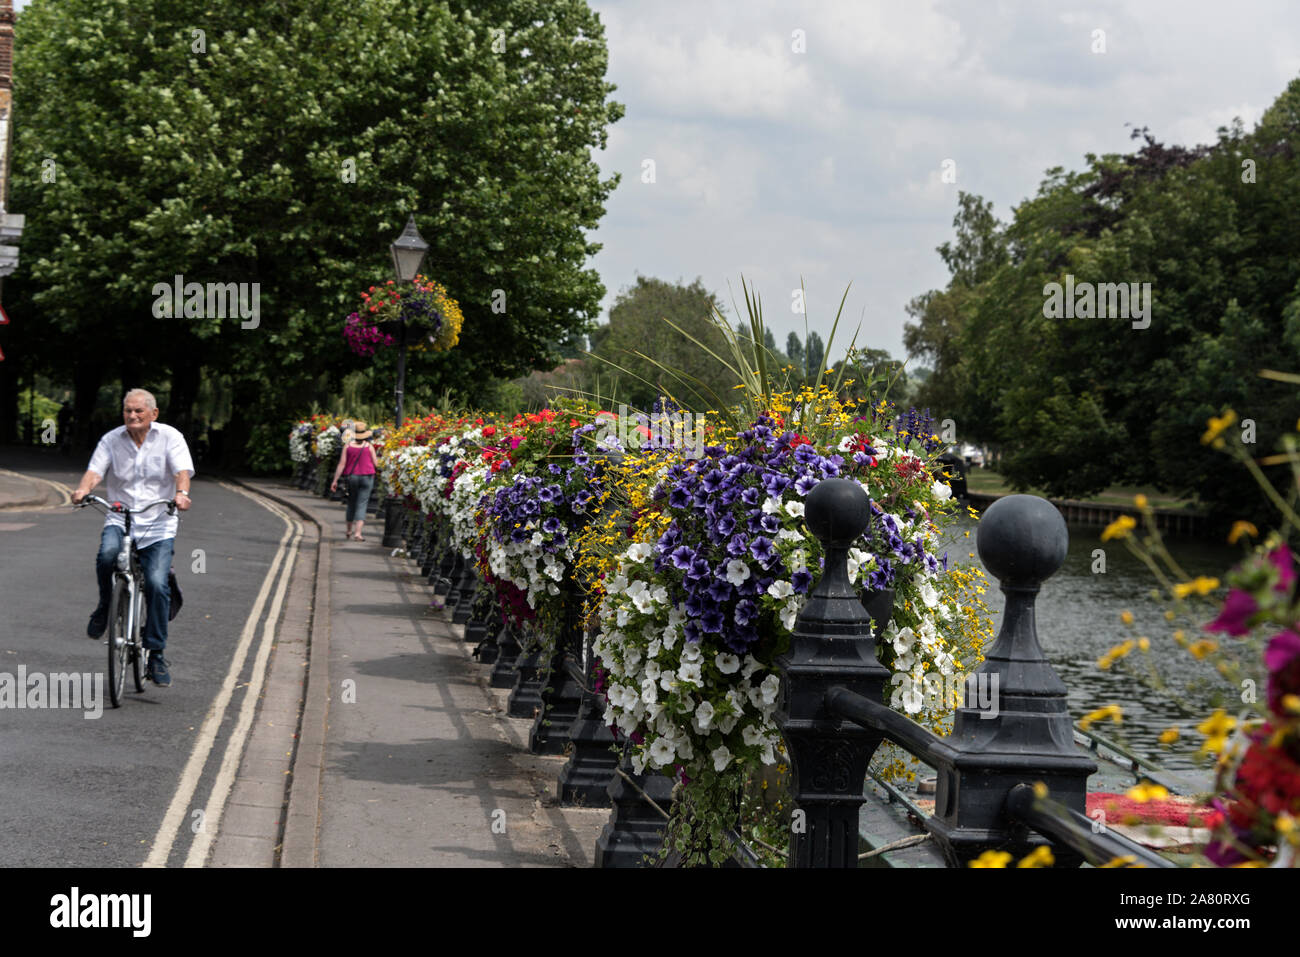 During the summer months in the UK, local councils plant a mix of brightly coloured flora in public places such as parks.   A local cyclist passing by Stock Photo